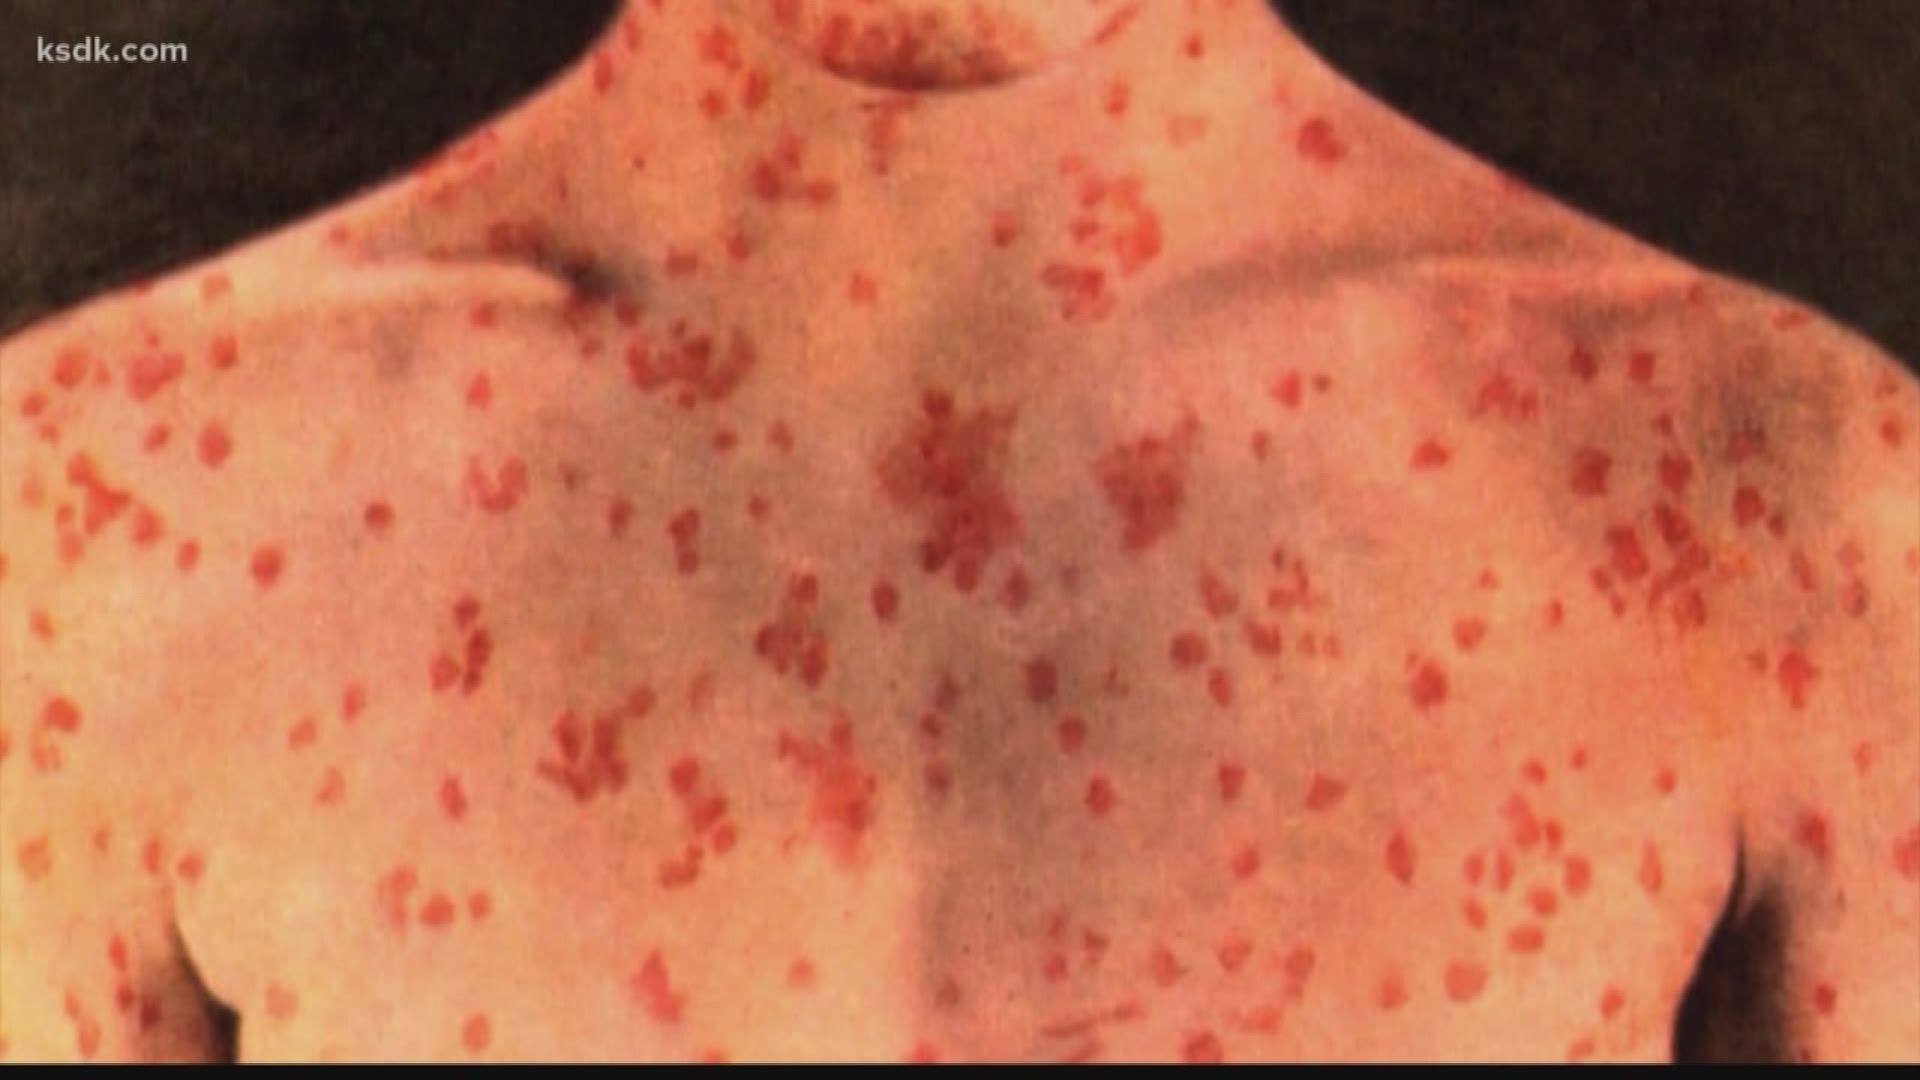 Measles can make you very uncomfortable, seriously ill and it is extremely contagious.